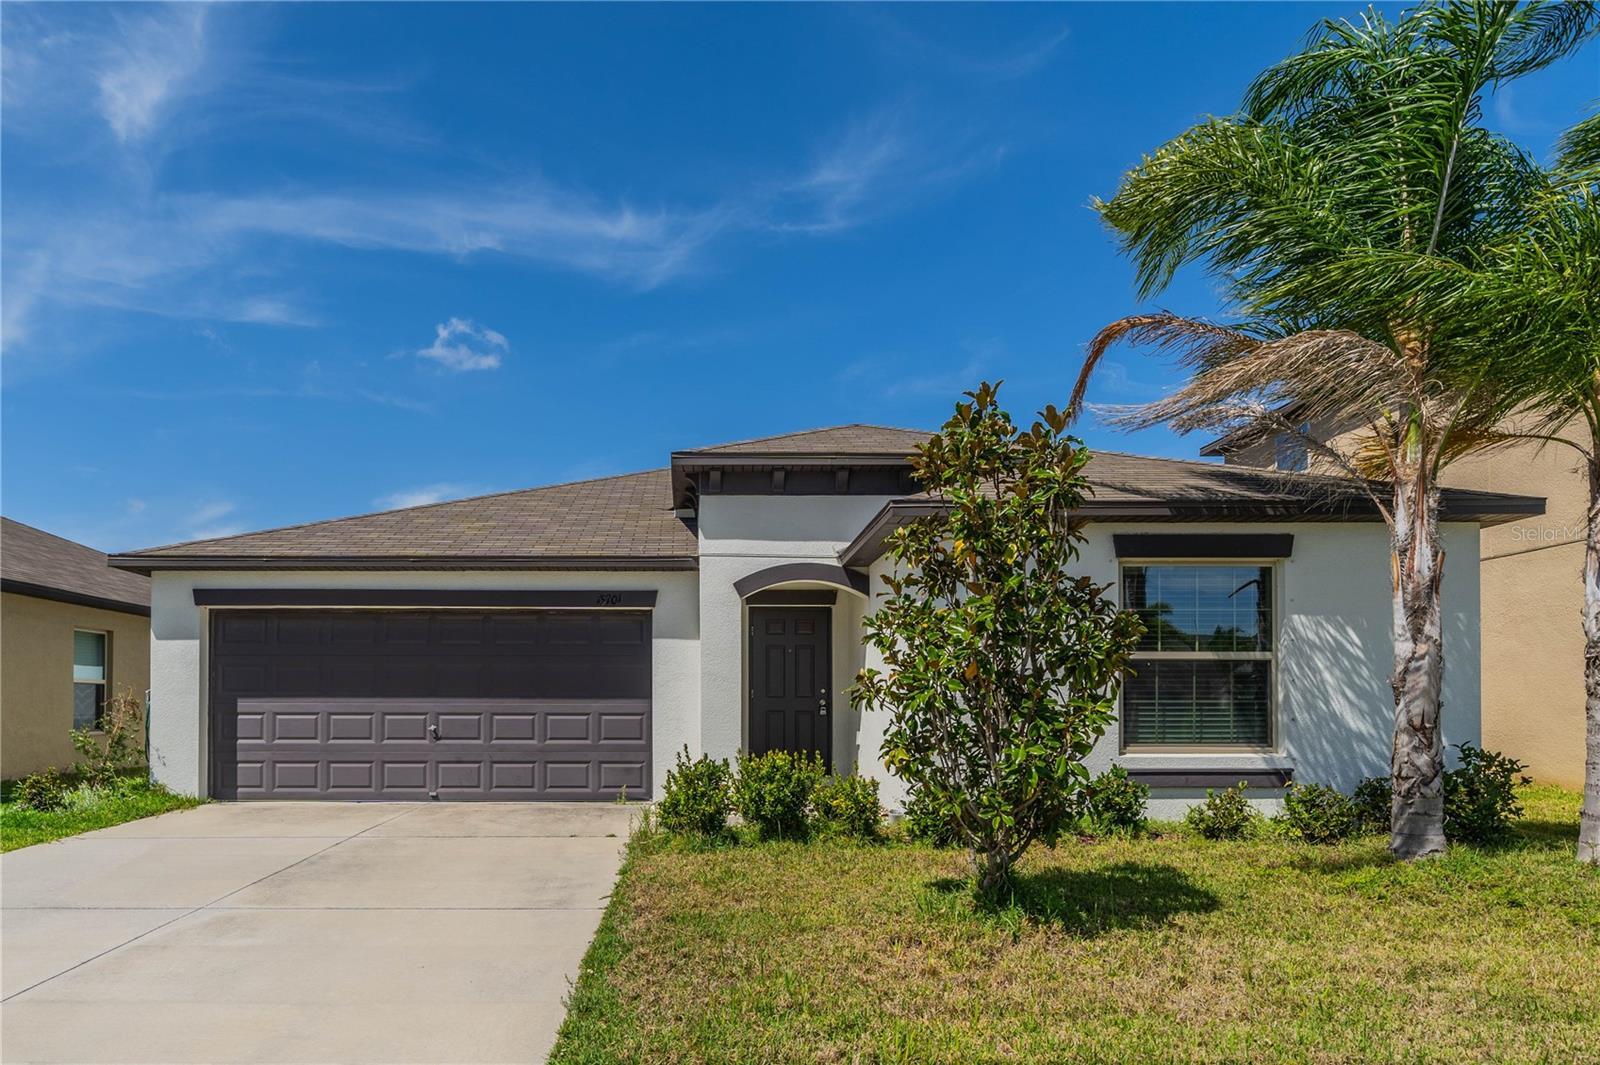 Photo one of 15701 Demory Point Pl Sun City Center FL 33573 | MLS T3513969